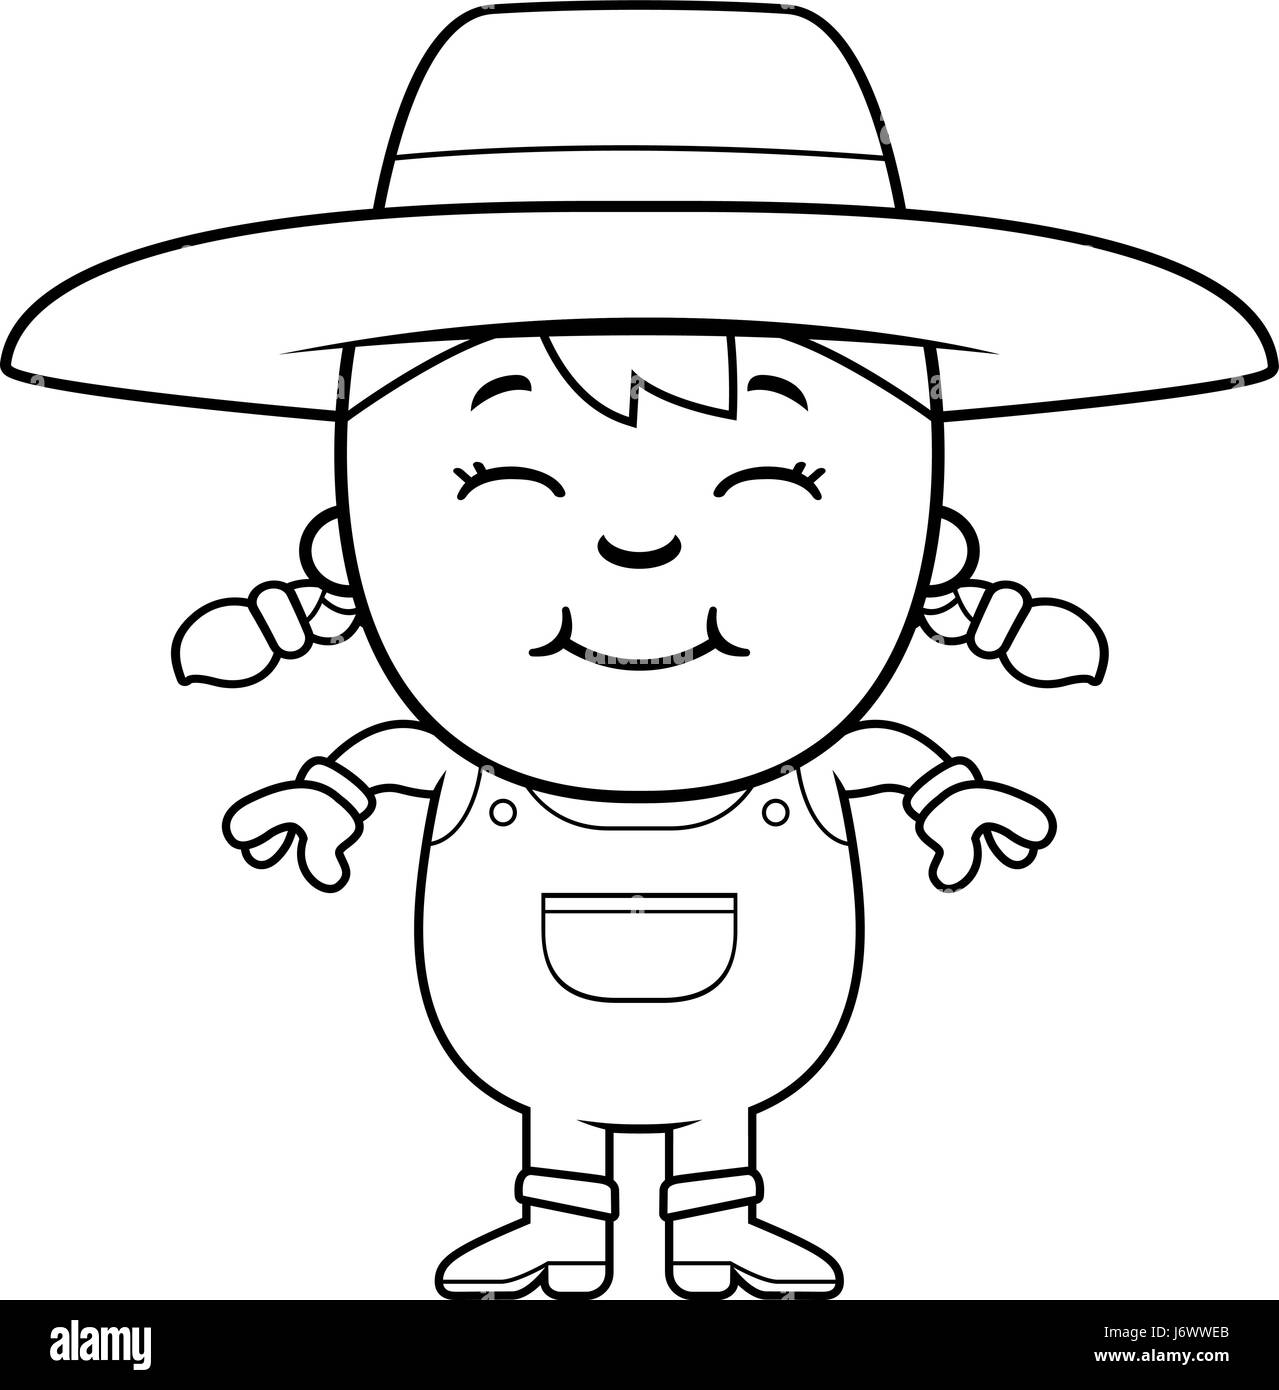 A cartoon illustration of a girl farmer standing and smiling Stock ...